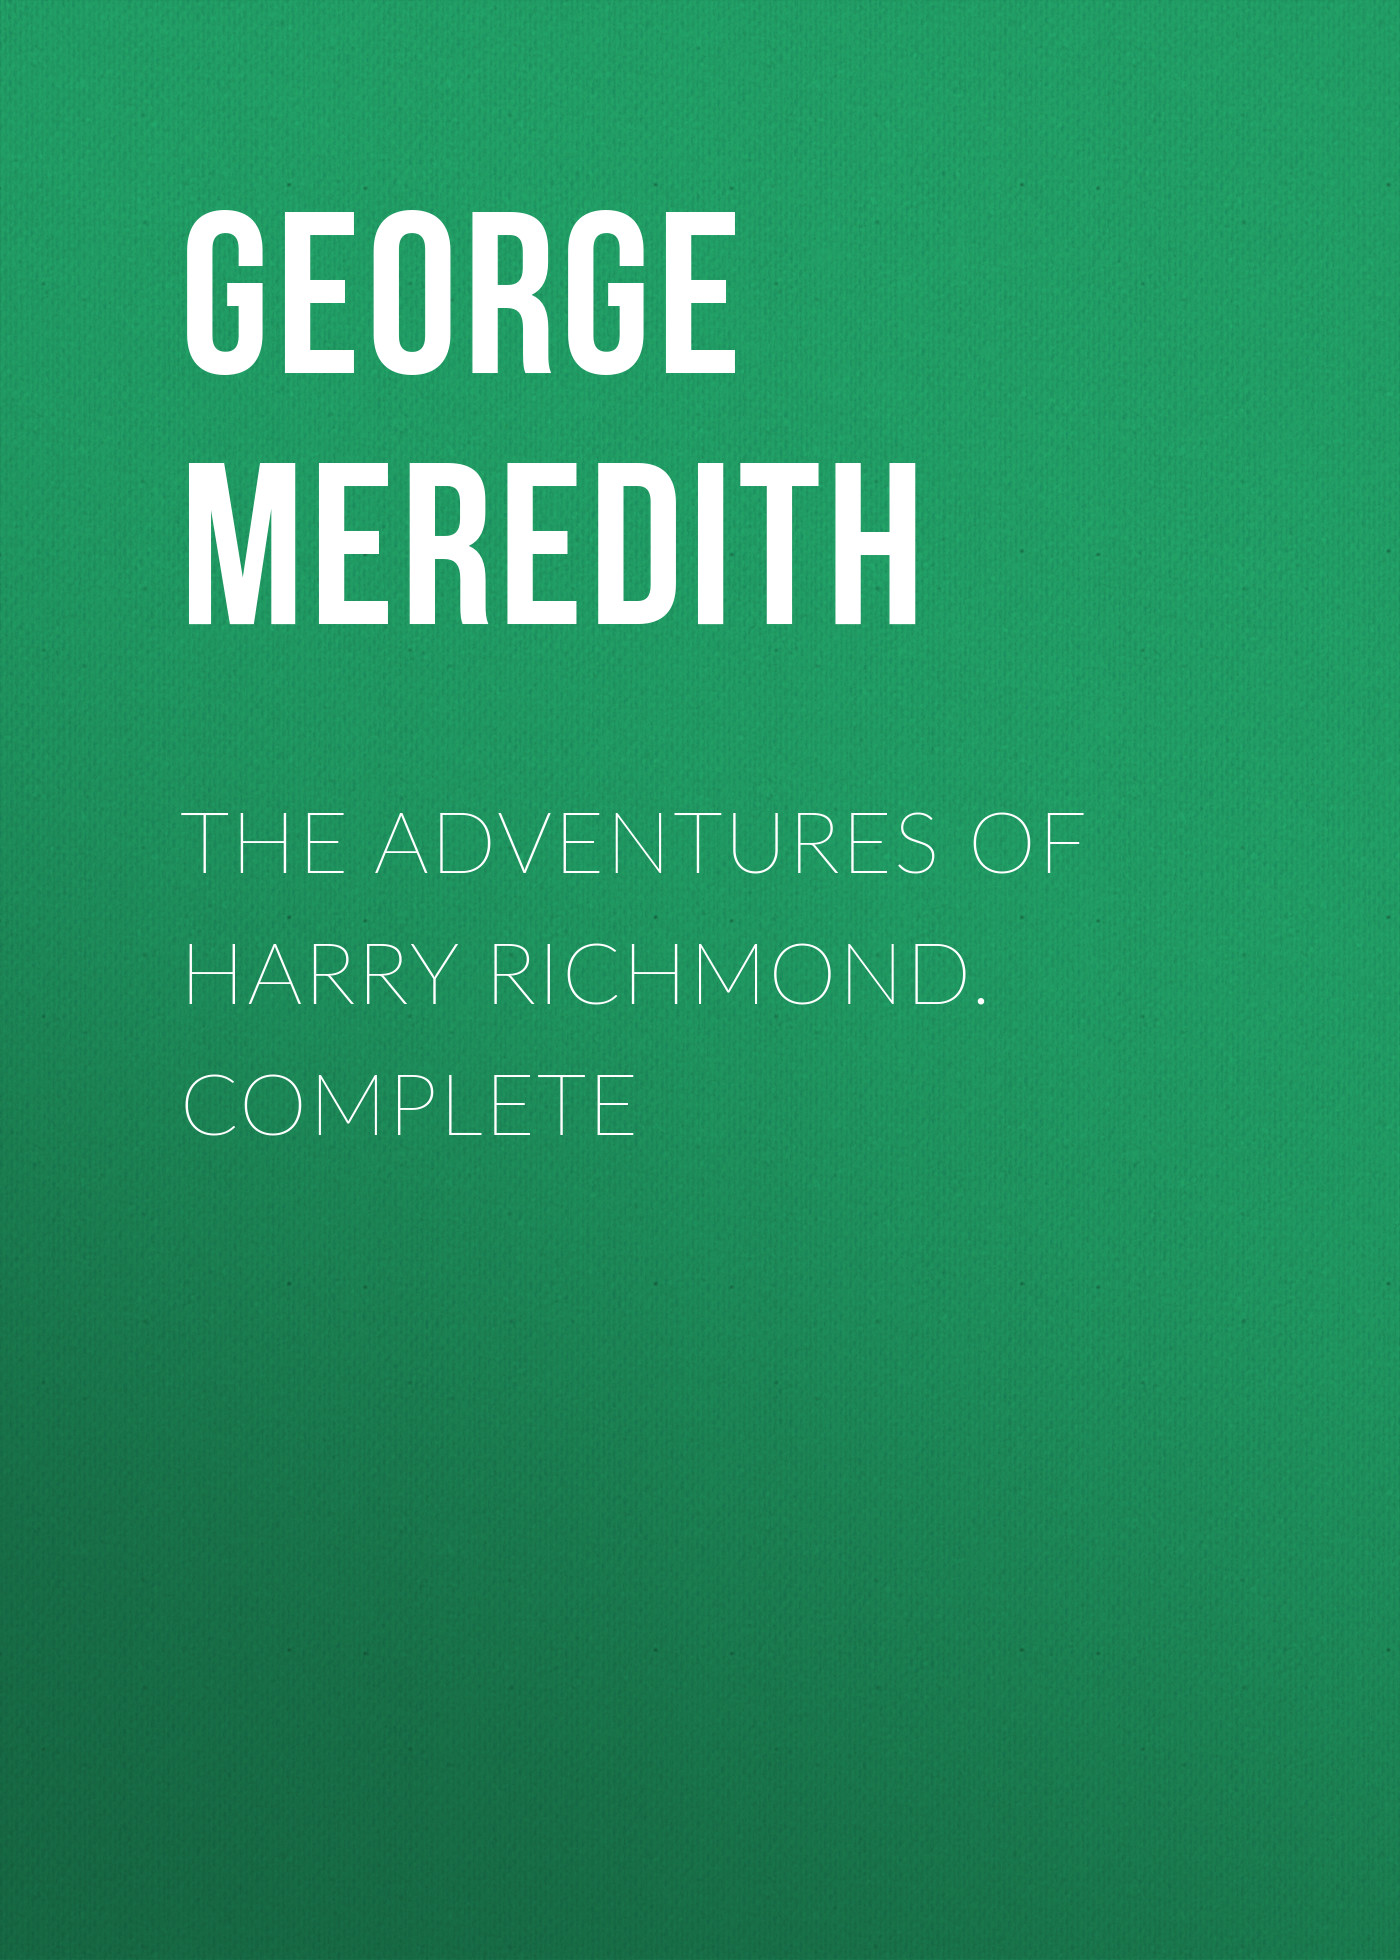 The Adventures of Harry Richmond. Complete